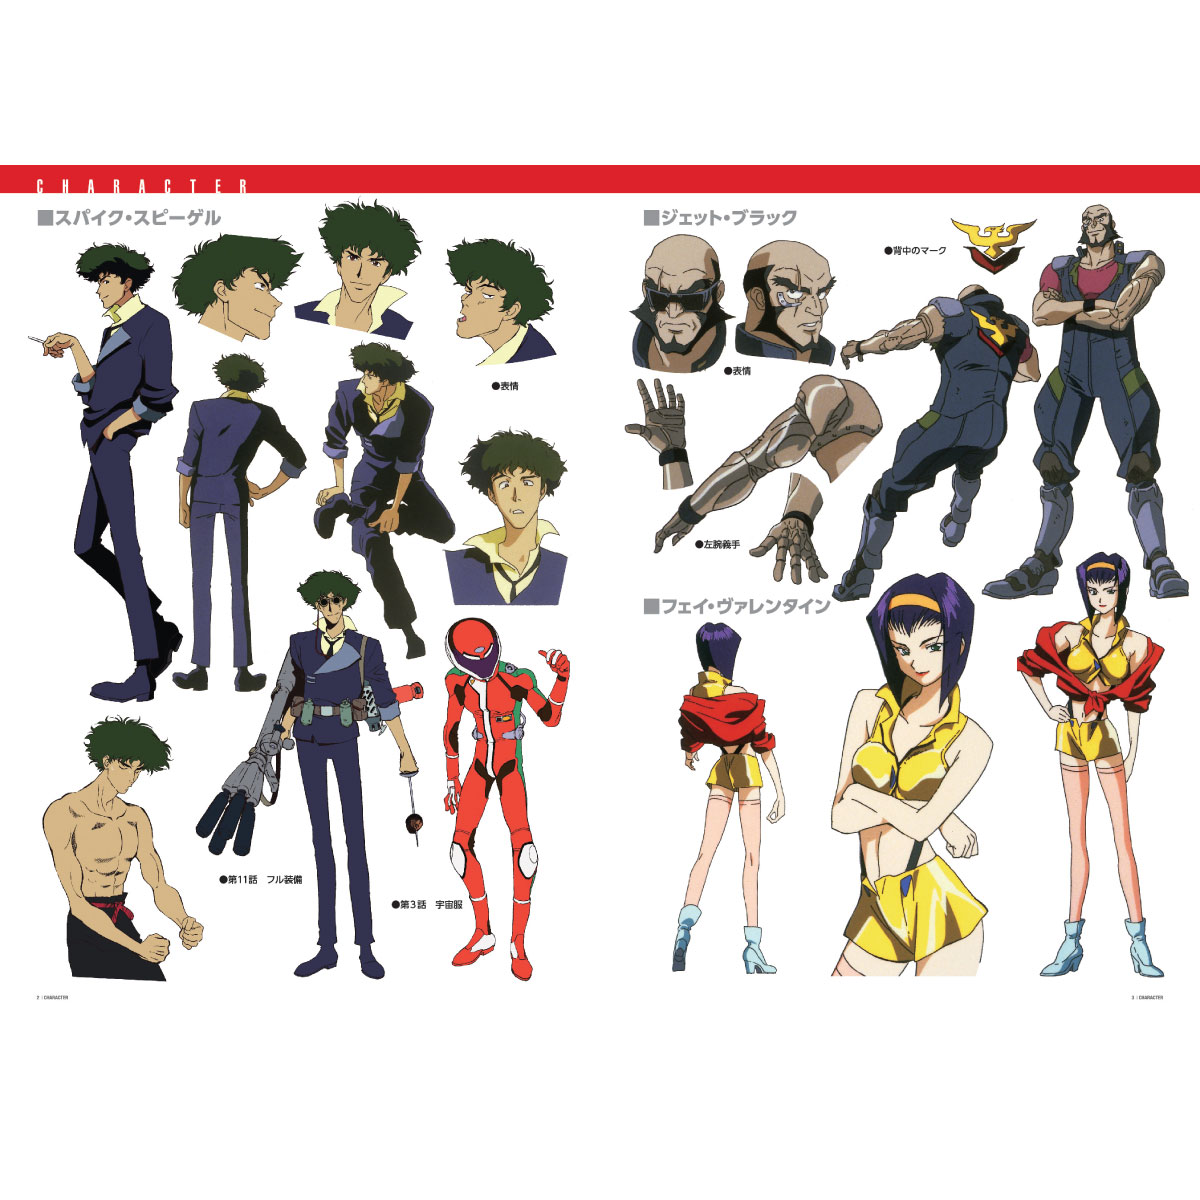 Love Great Music From Great Shows? Pre-Order Two Cowboy Bebop